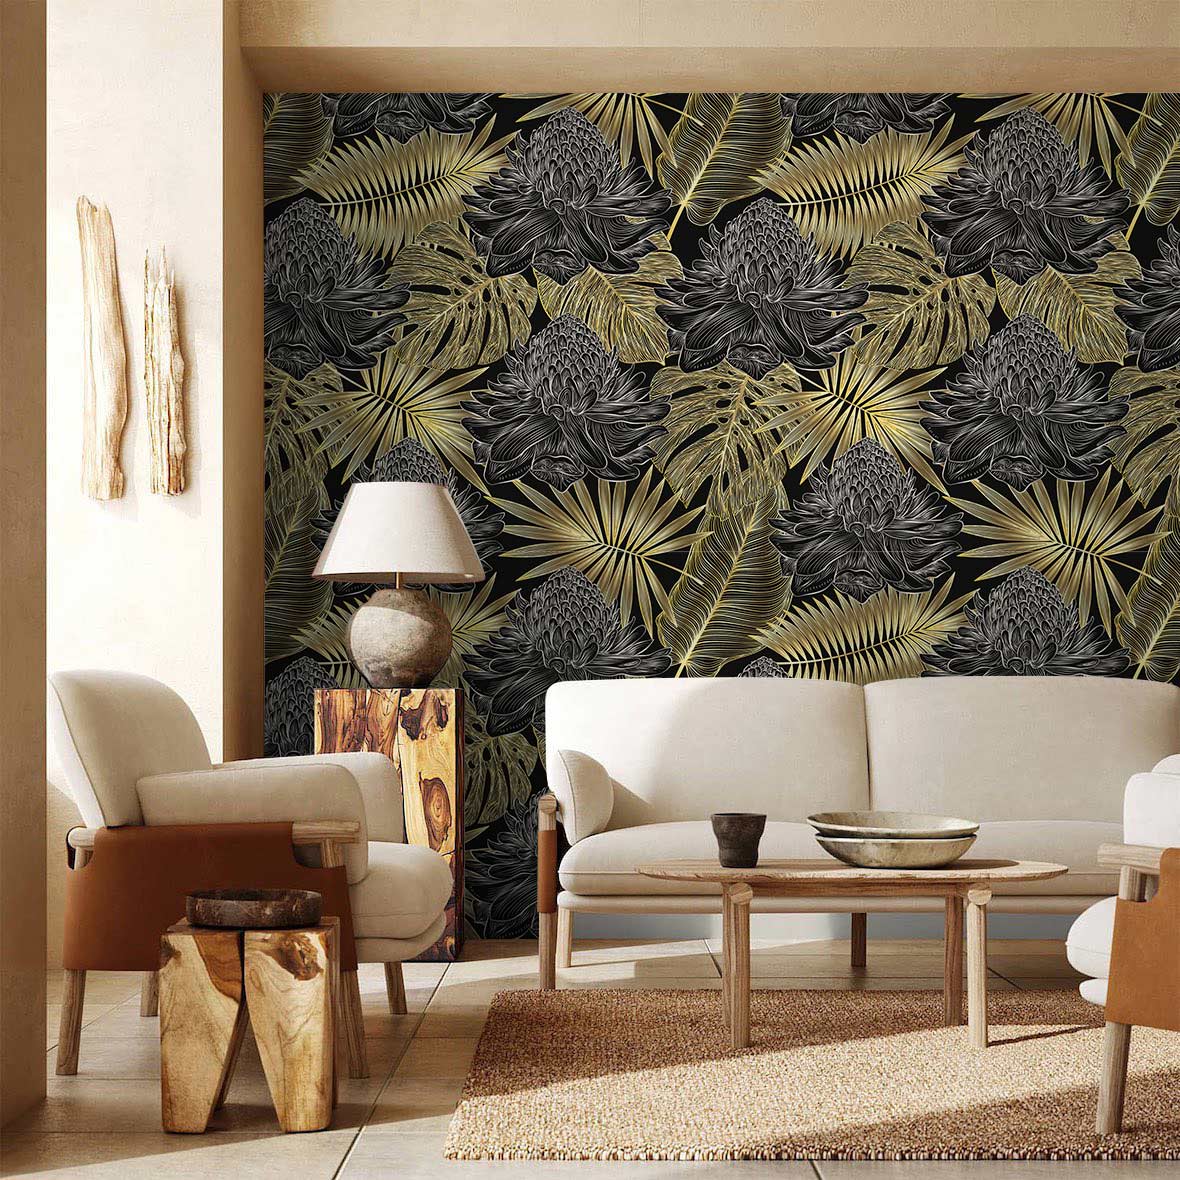 A floral and leaf wallpaper that may be personalized